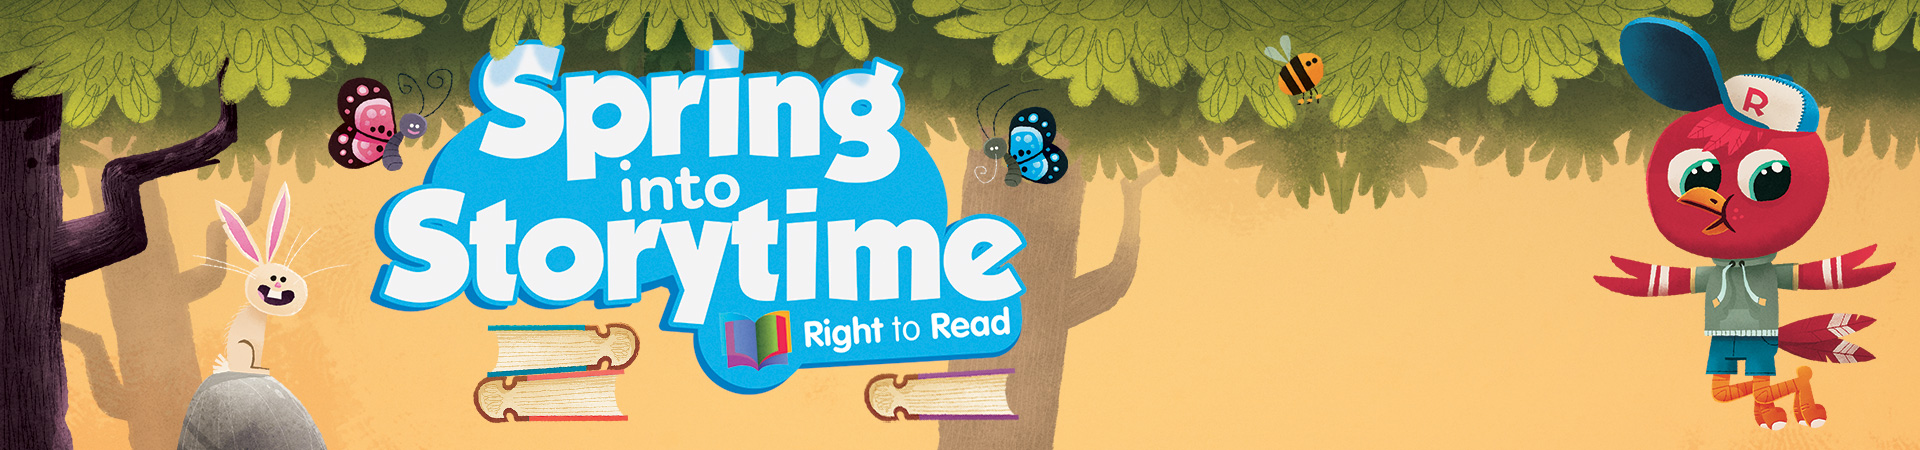 spring-into-storytime-banner